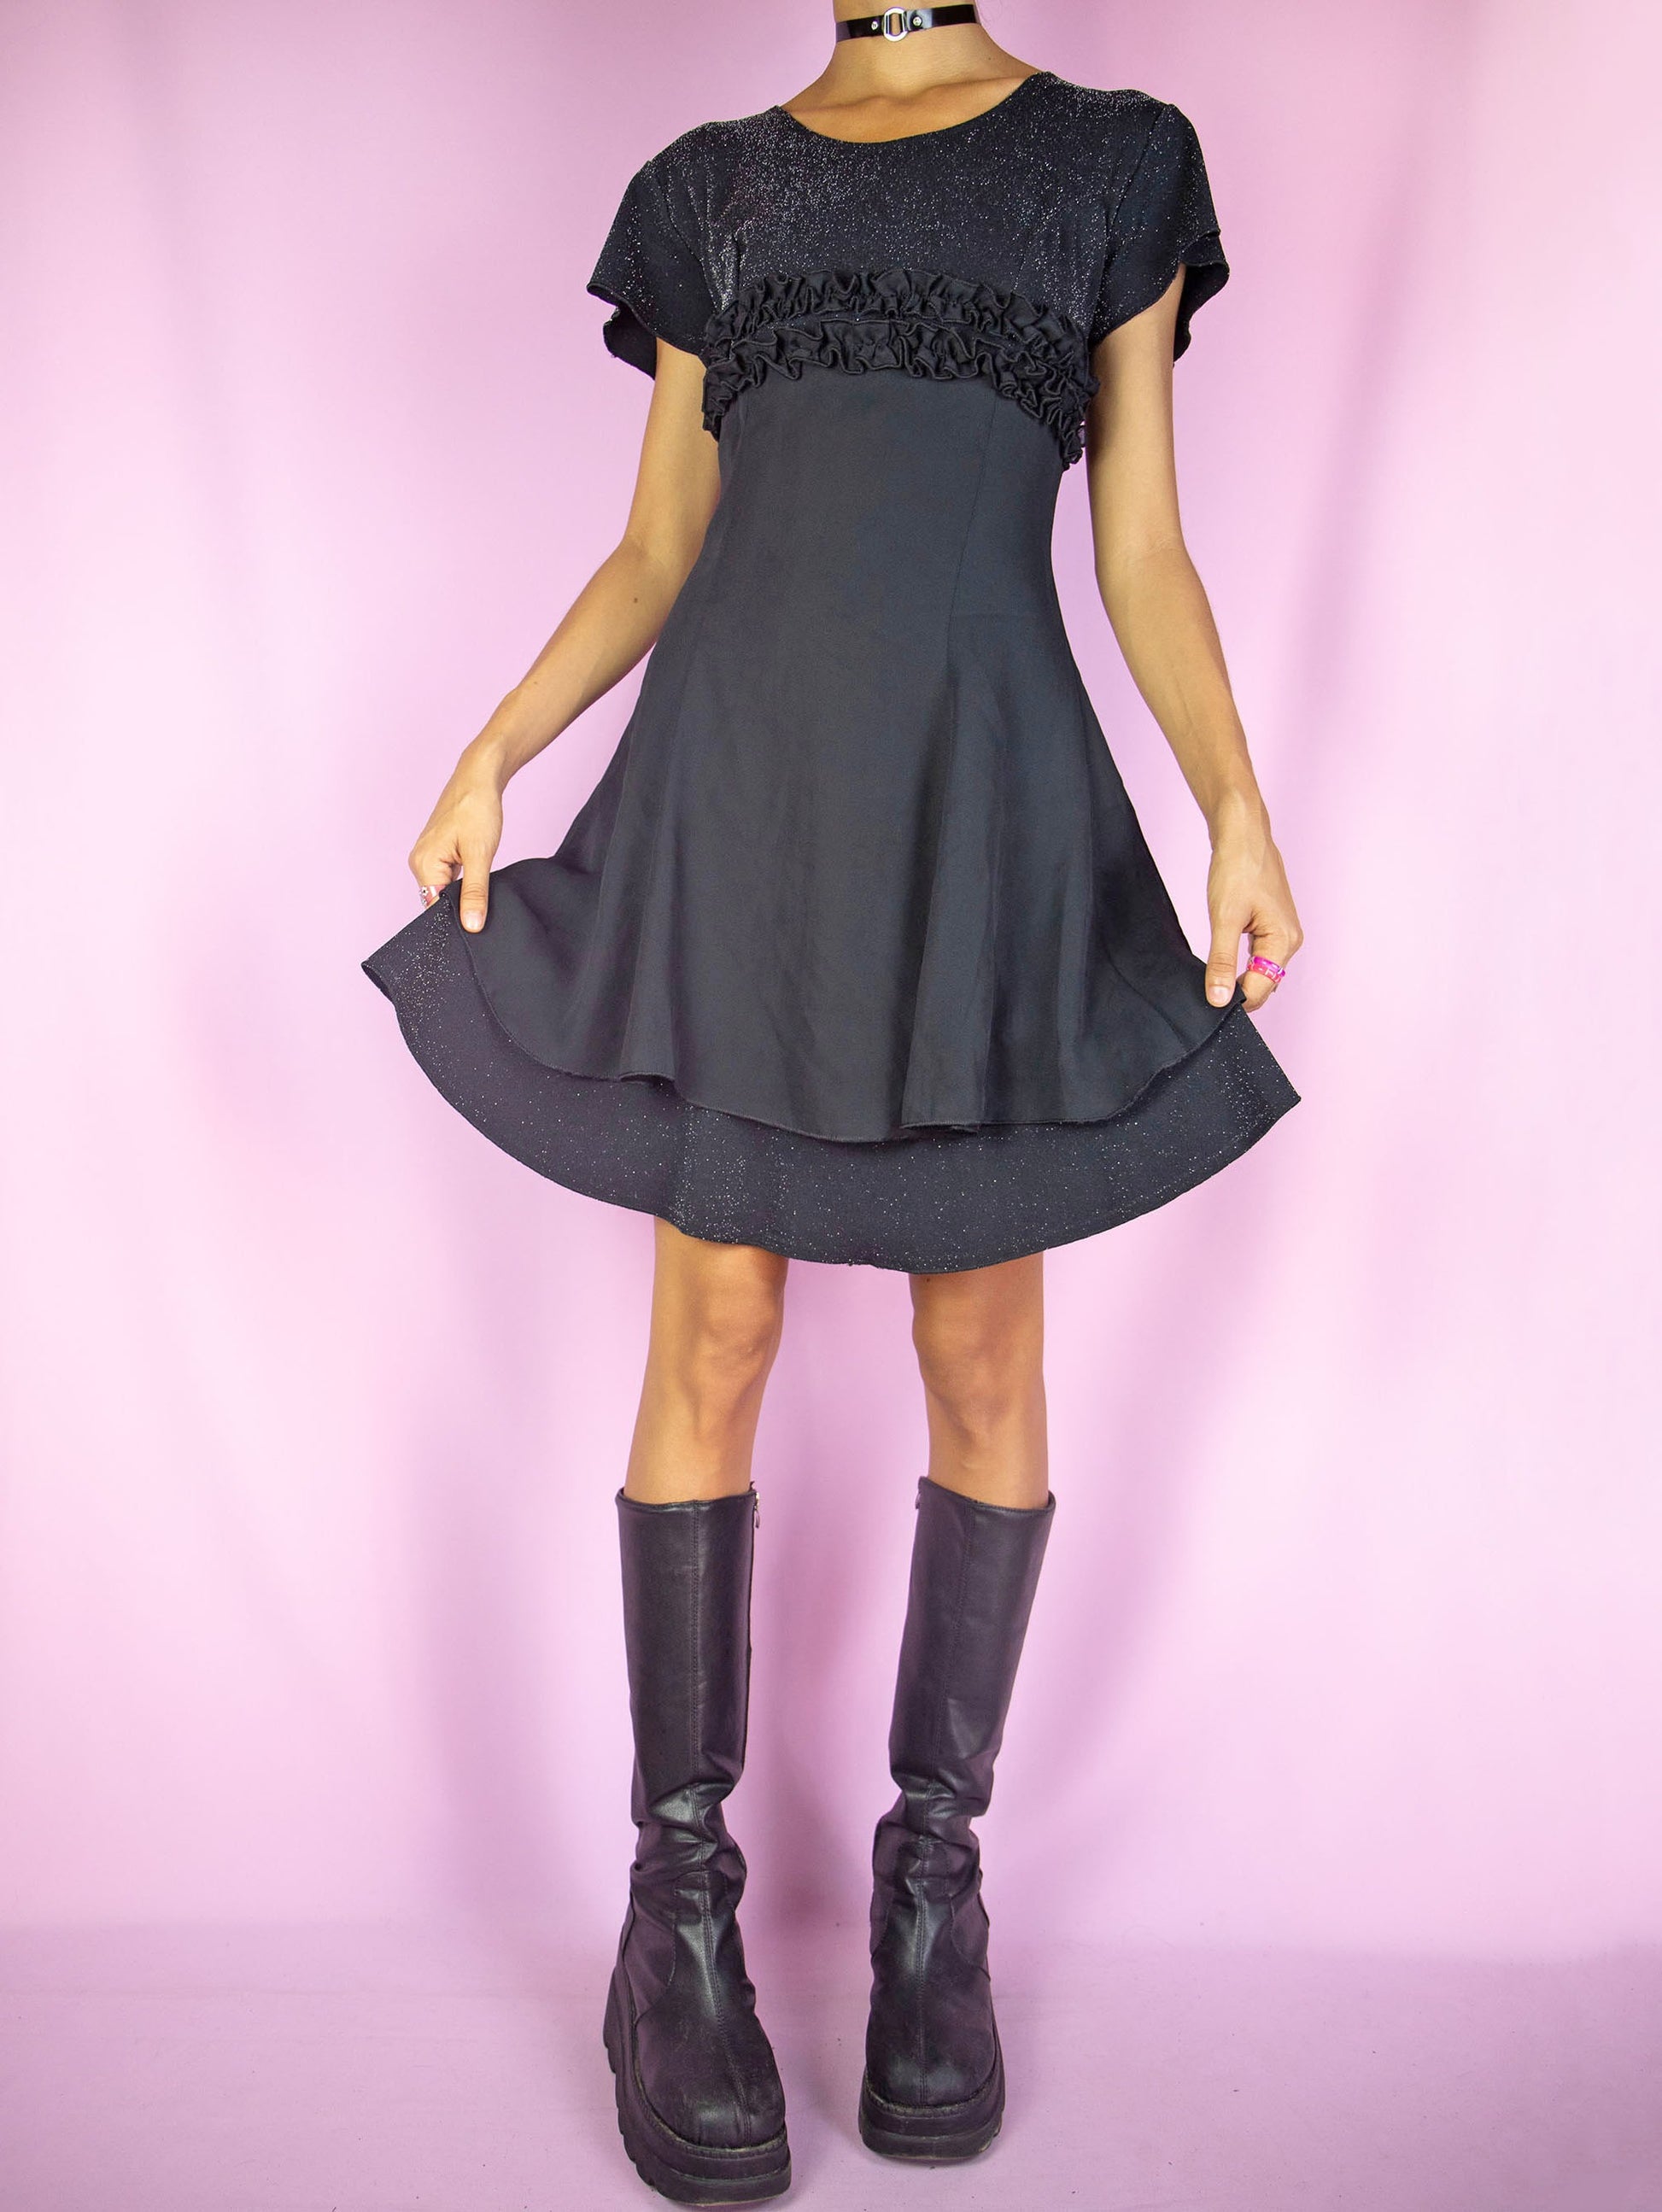 The Vintage 90s Sparkle Party Mini Dress is a black and dark gray silver sparkly short sleeve flared dress with ruched ruffle detail, double layer hem and back zipper closure. Fairy grunge whimsygoth 1990s night dress.